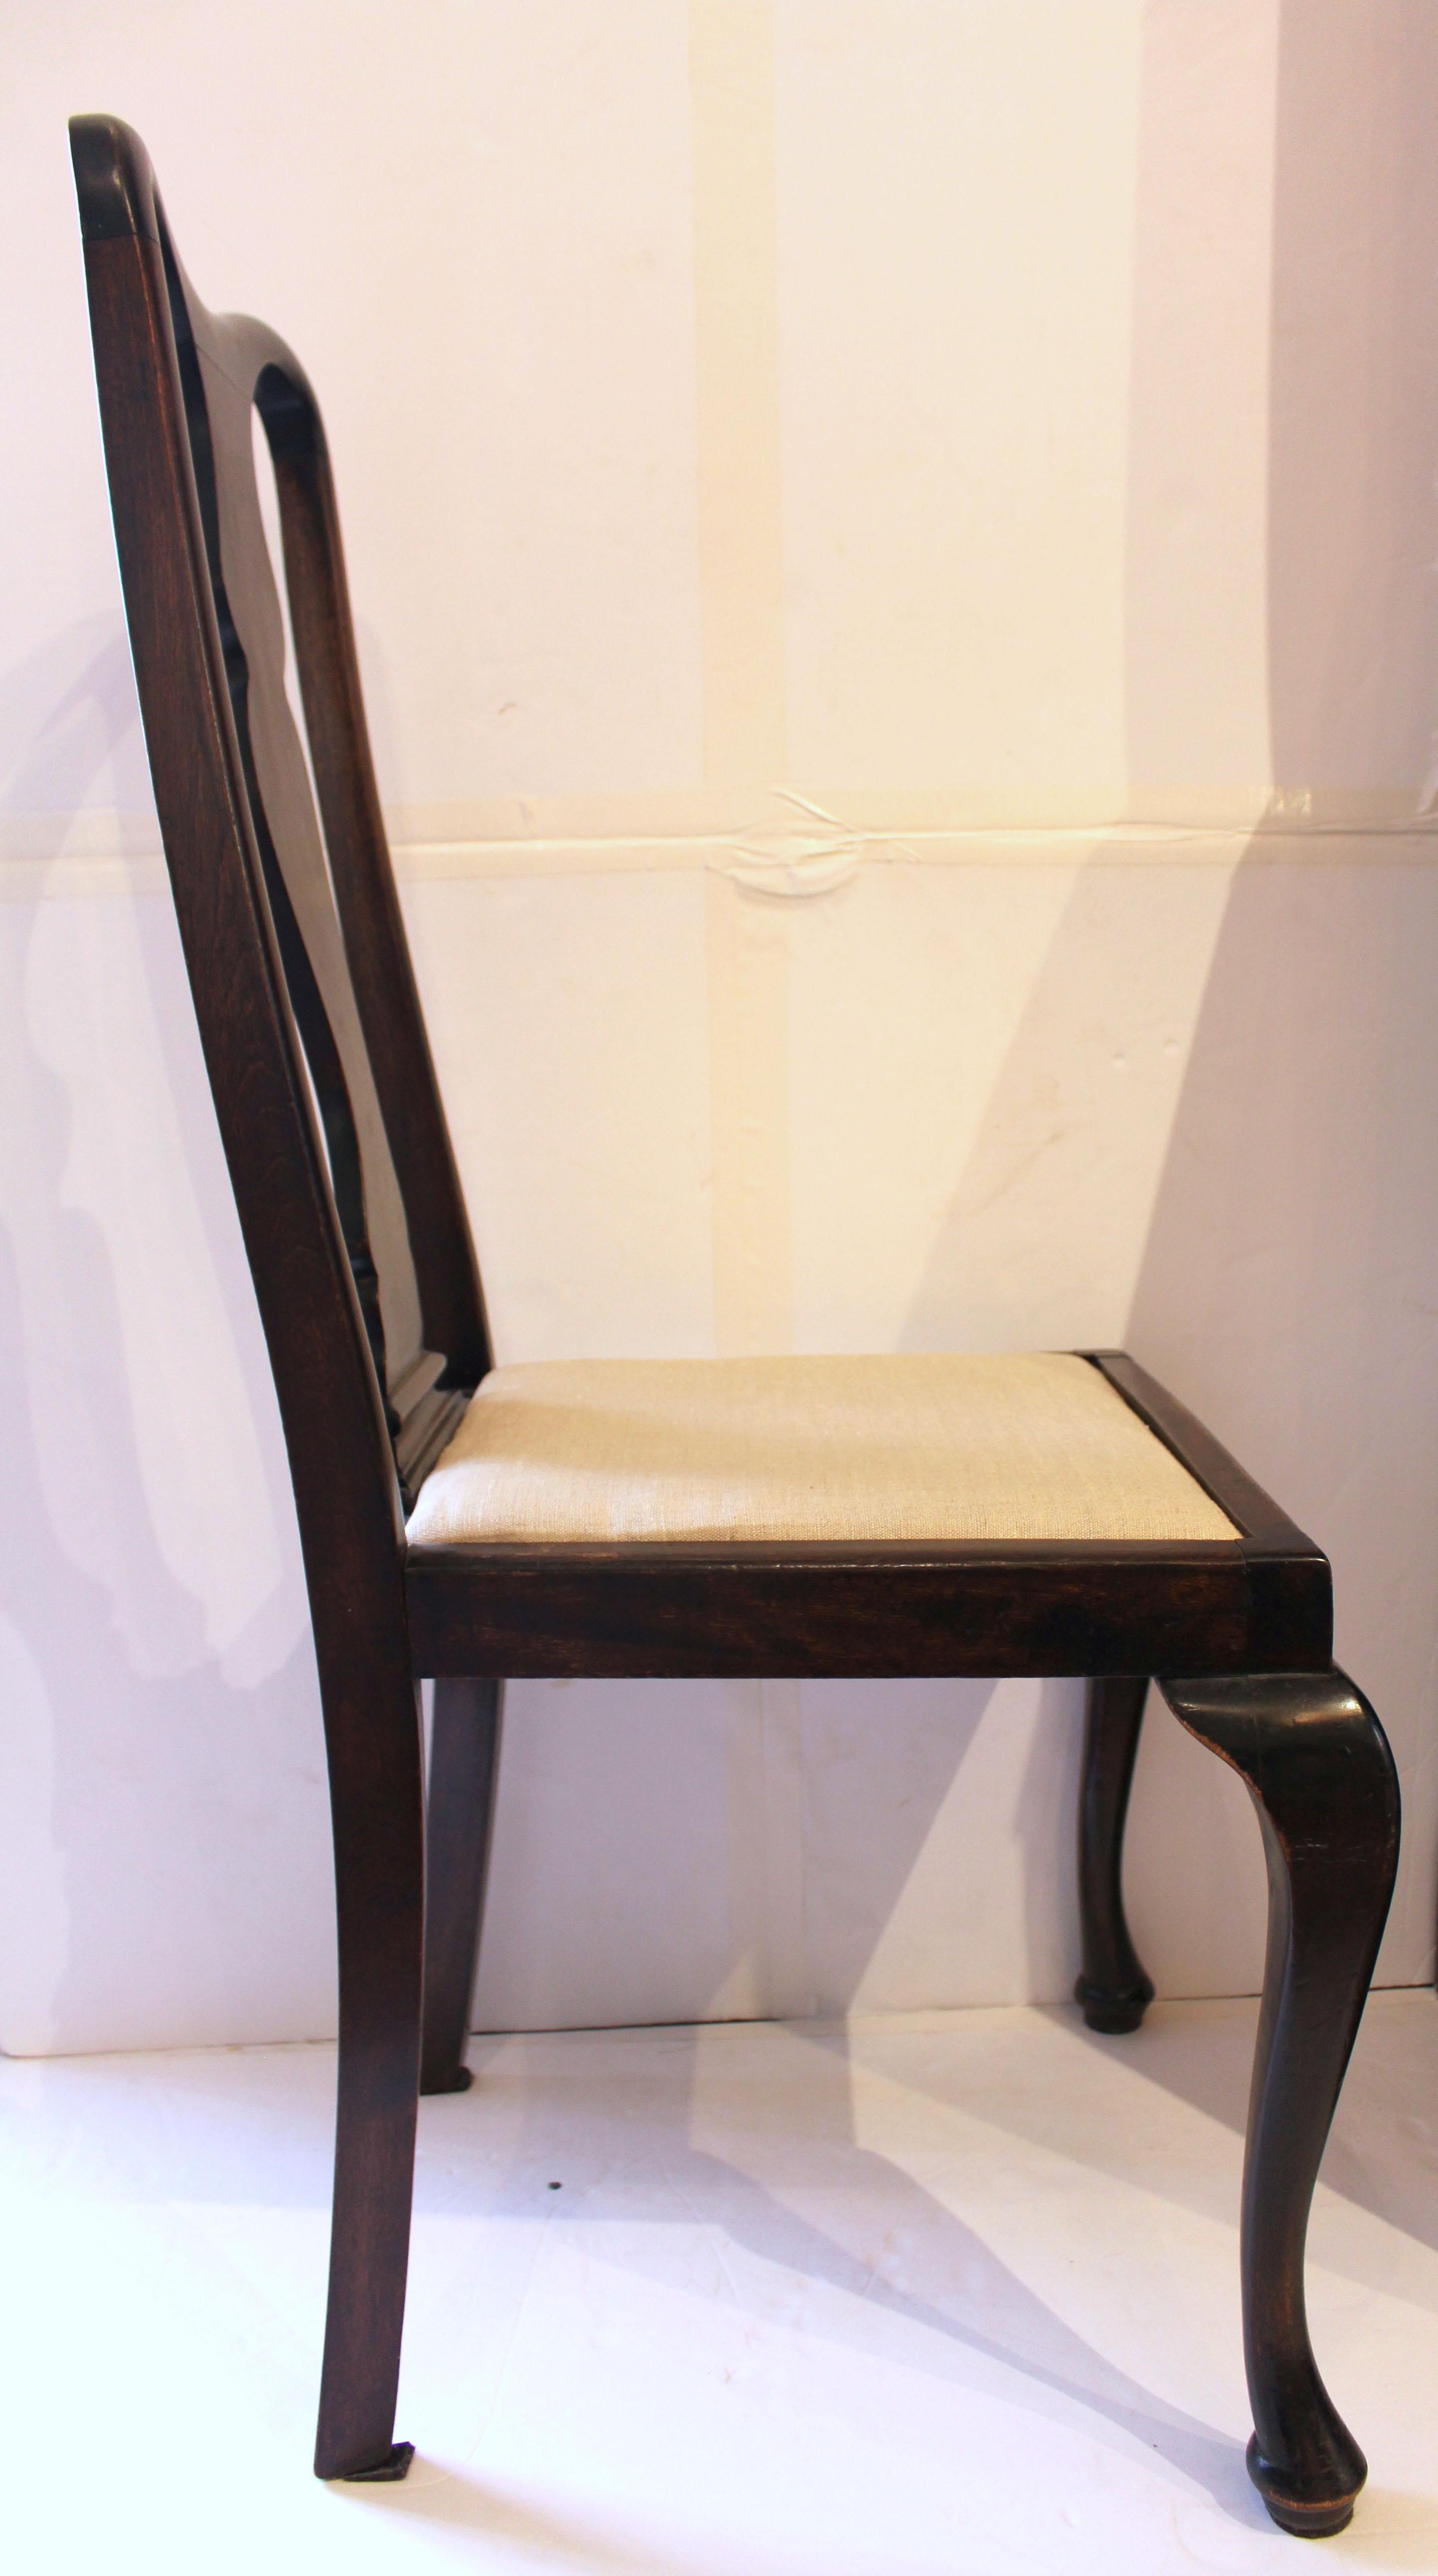 Late 19th century Queen Anne style side chair, English. Diminutive scale. Simple cabriole legs ending in pad feet. Inset slip seat. Shaped crest rail and typical Queen Anne design backsplat.
20